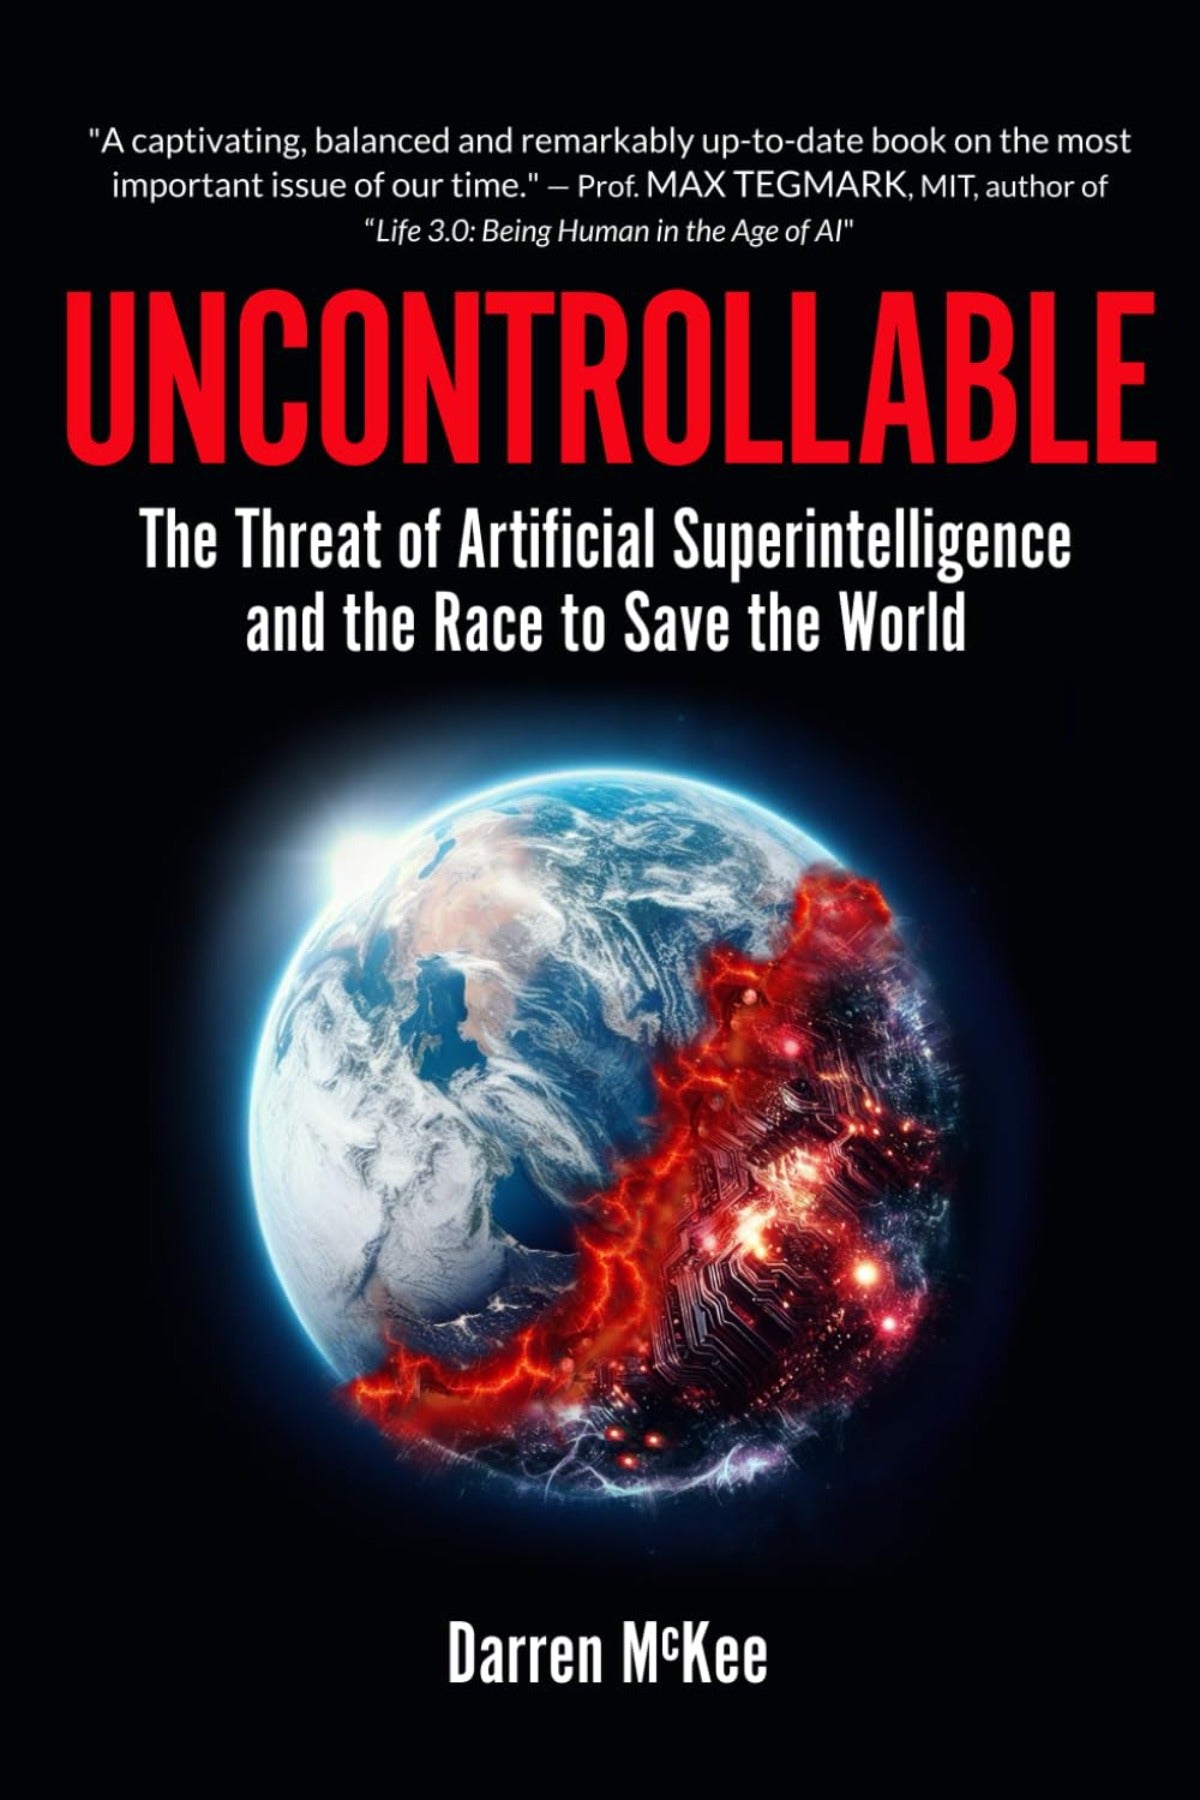 Uncontrollable: The Threat of Artificial Superintelligence and the Race to Save the World